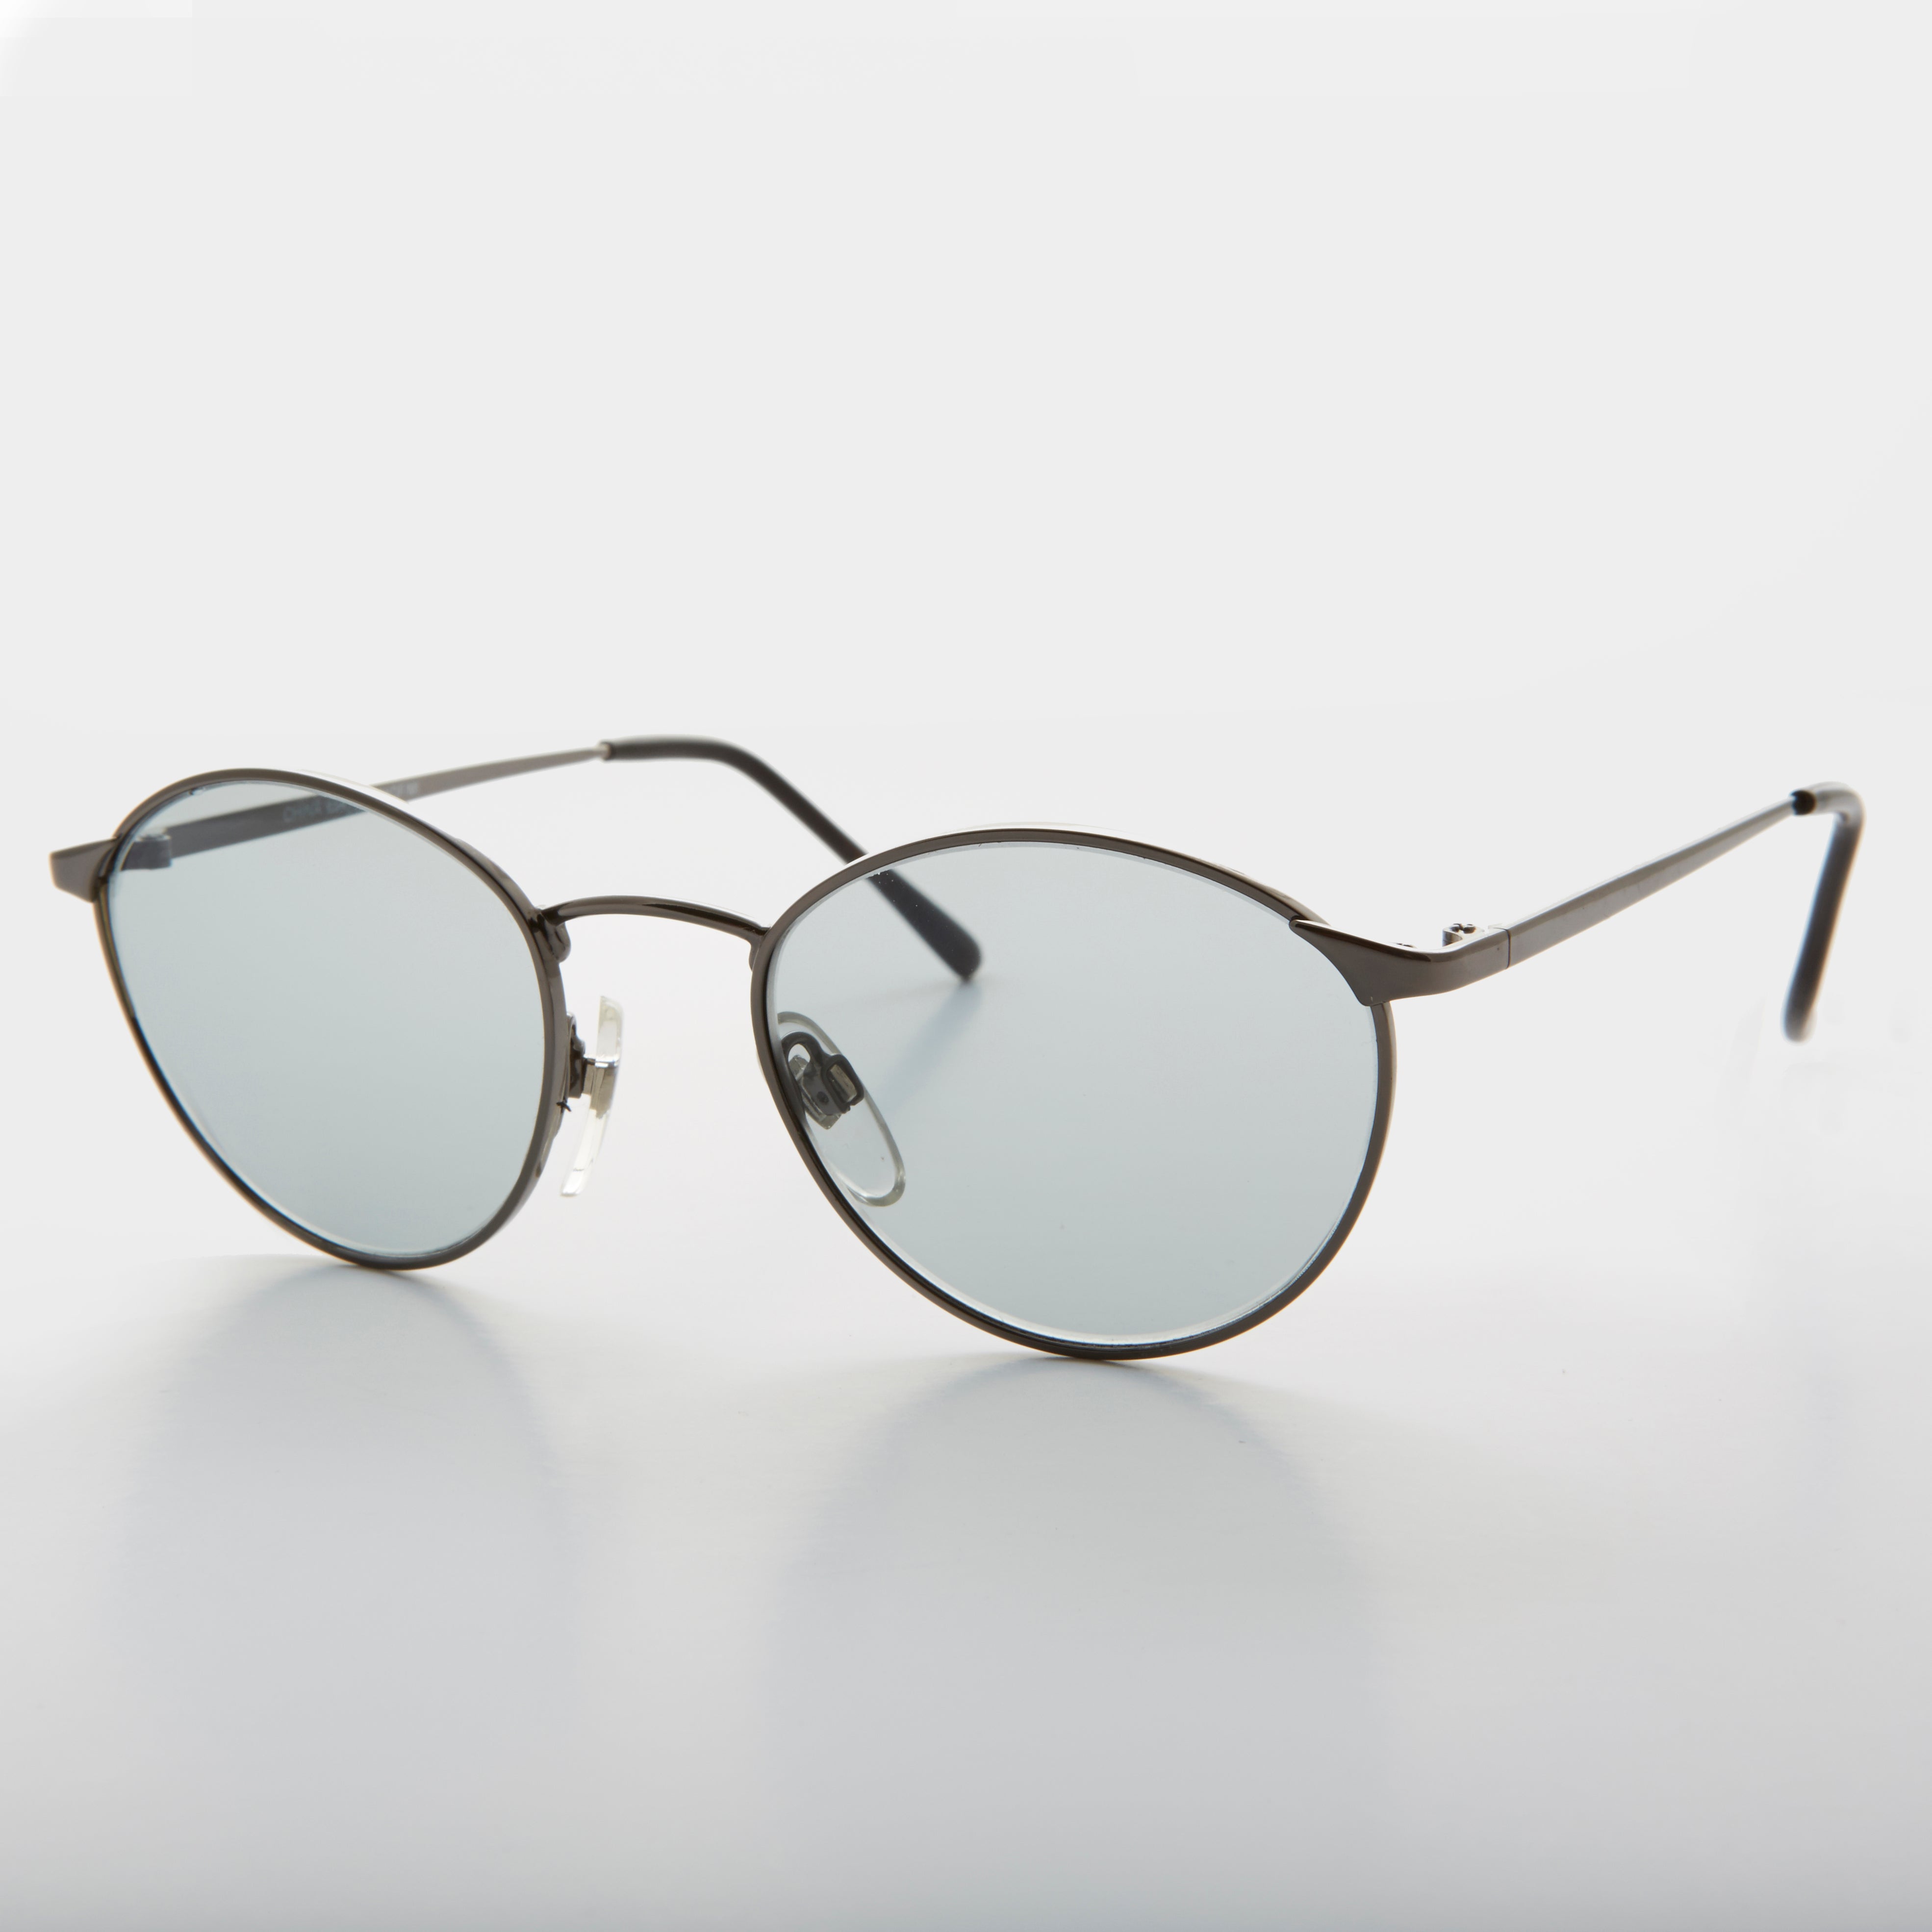 Classic Unisex Sunglass with Clear to Dark Transition Lenses 